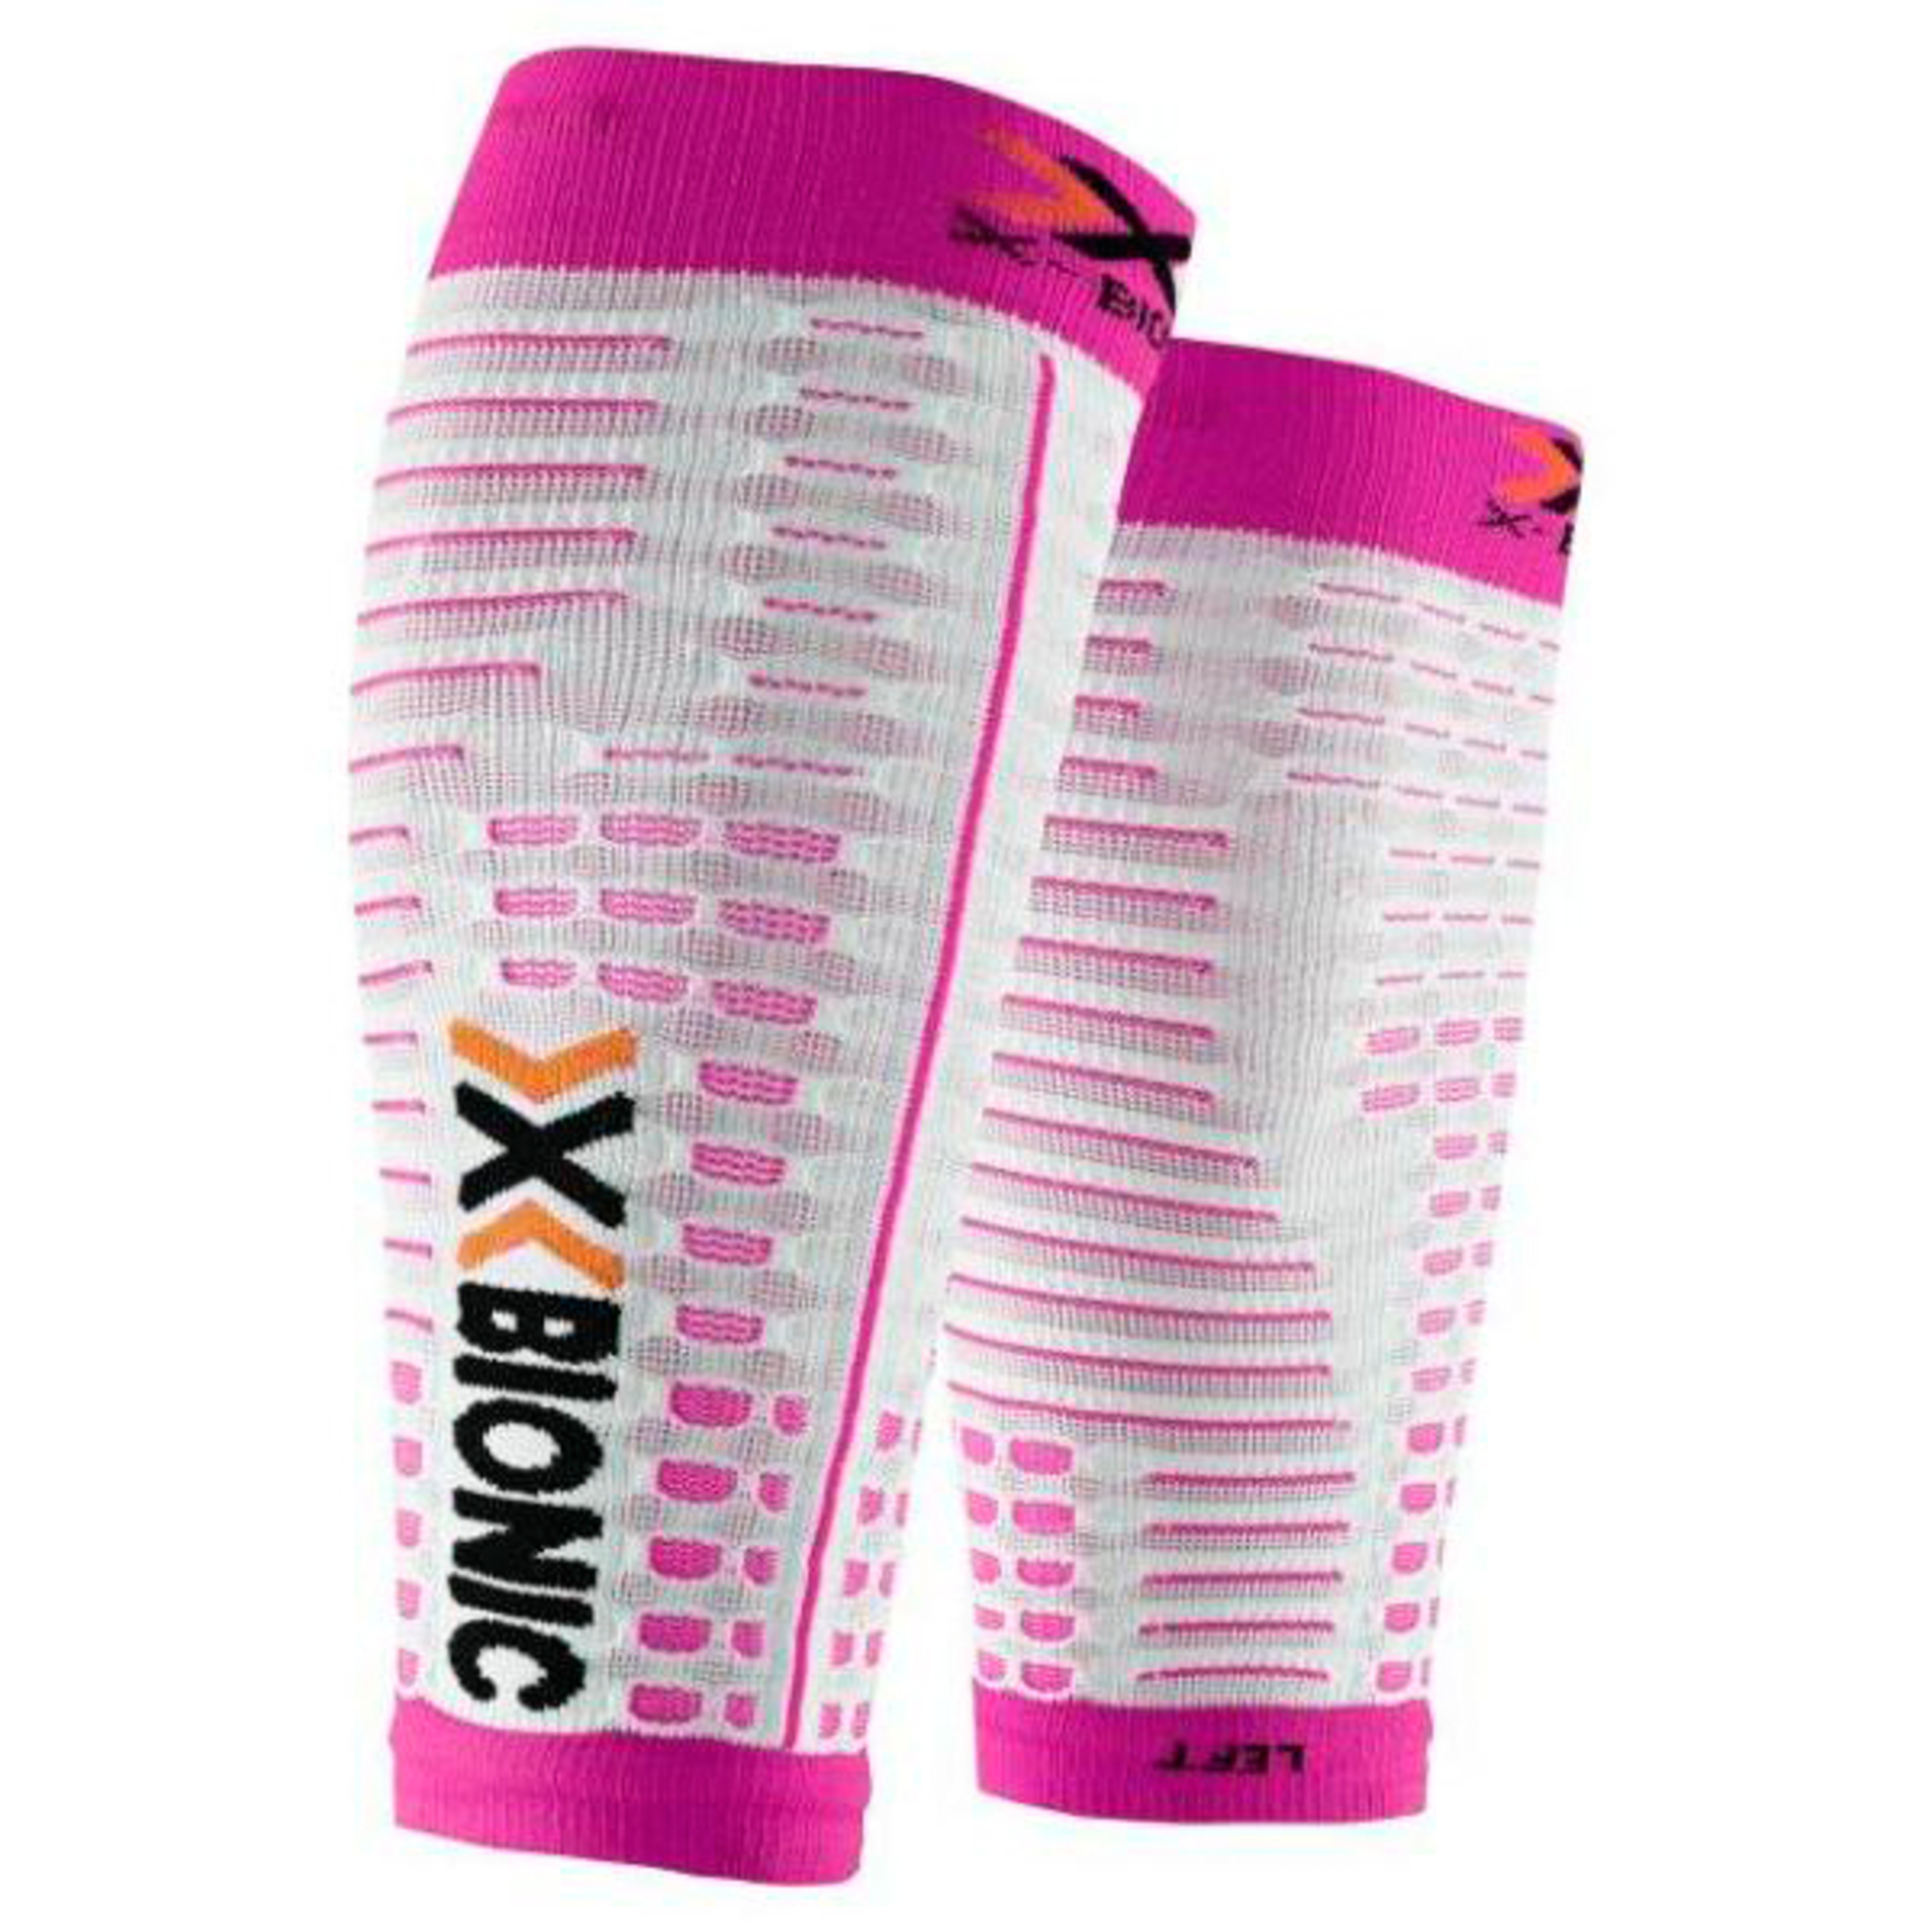 Compresores Gemelo Spyker Competition De Mujer X-bionic